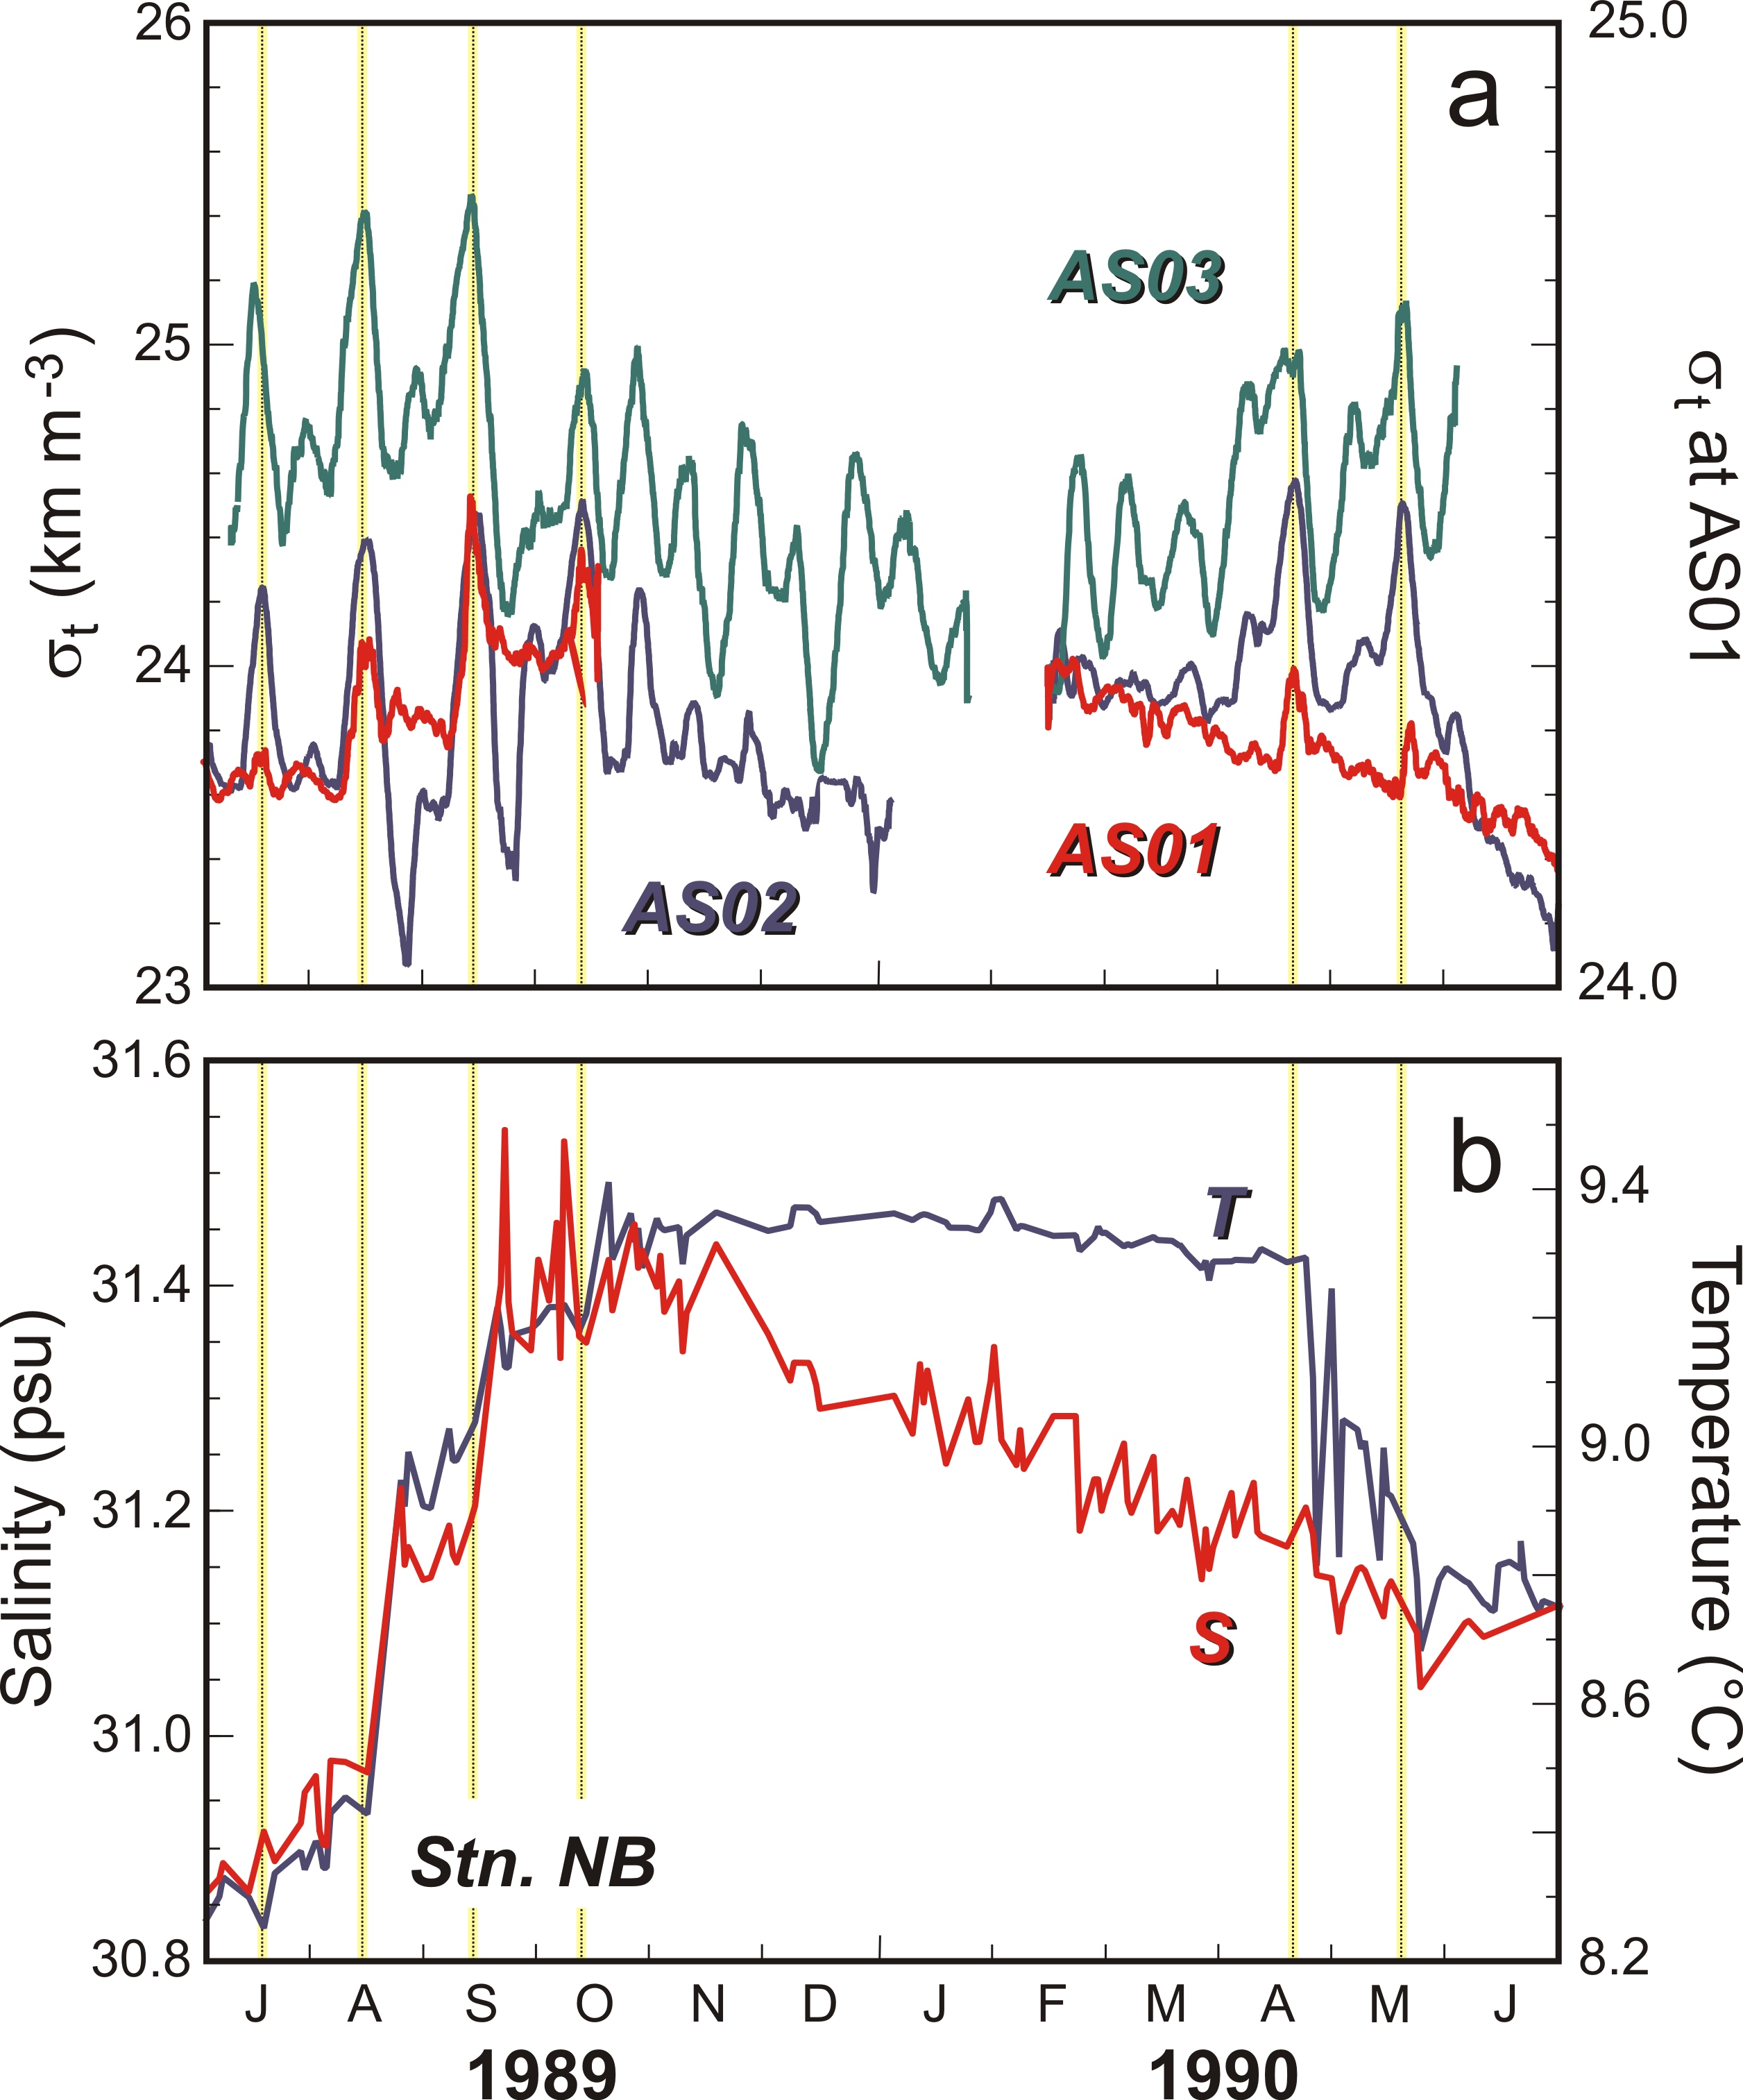 The top panel (a) gives a time series of the bottom water density at AS02, AS03, and AS01, and the bottom panel (b) gives the temperature and salinity measured near the bottom at NB